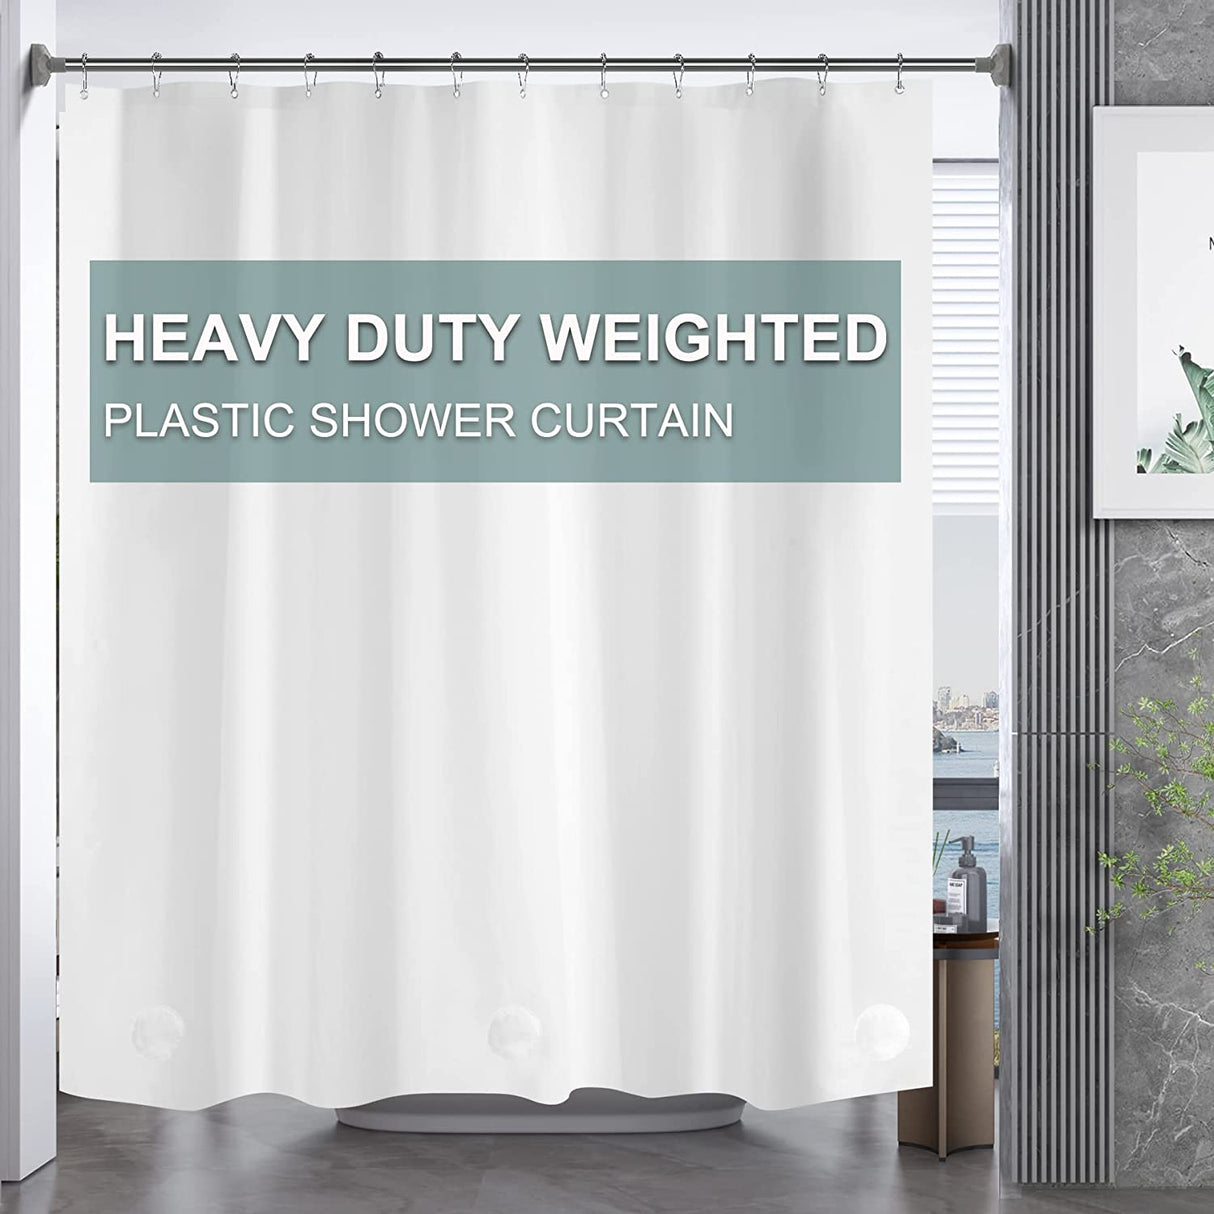 AmazerBath 8G EVA Plastic Shower Curtain Line with Clear Weights and R